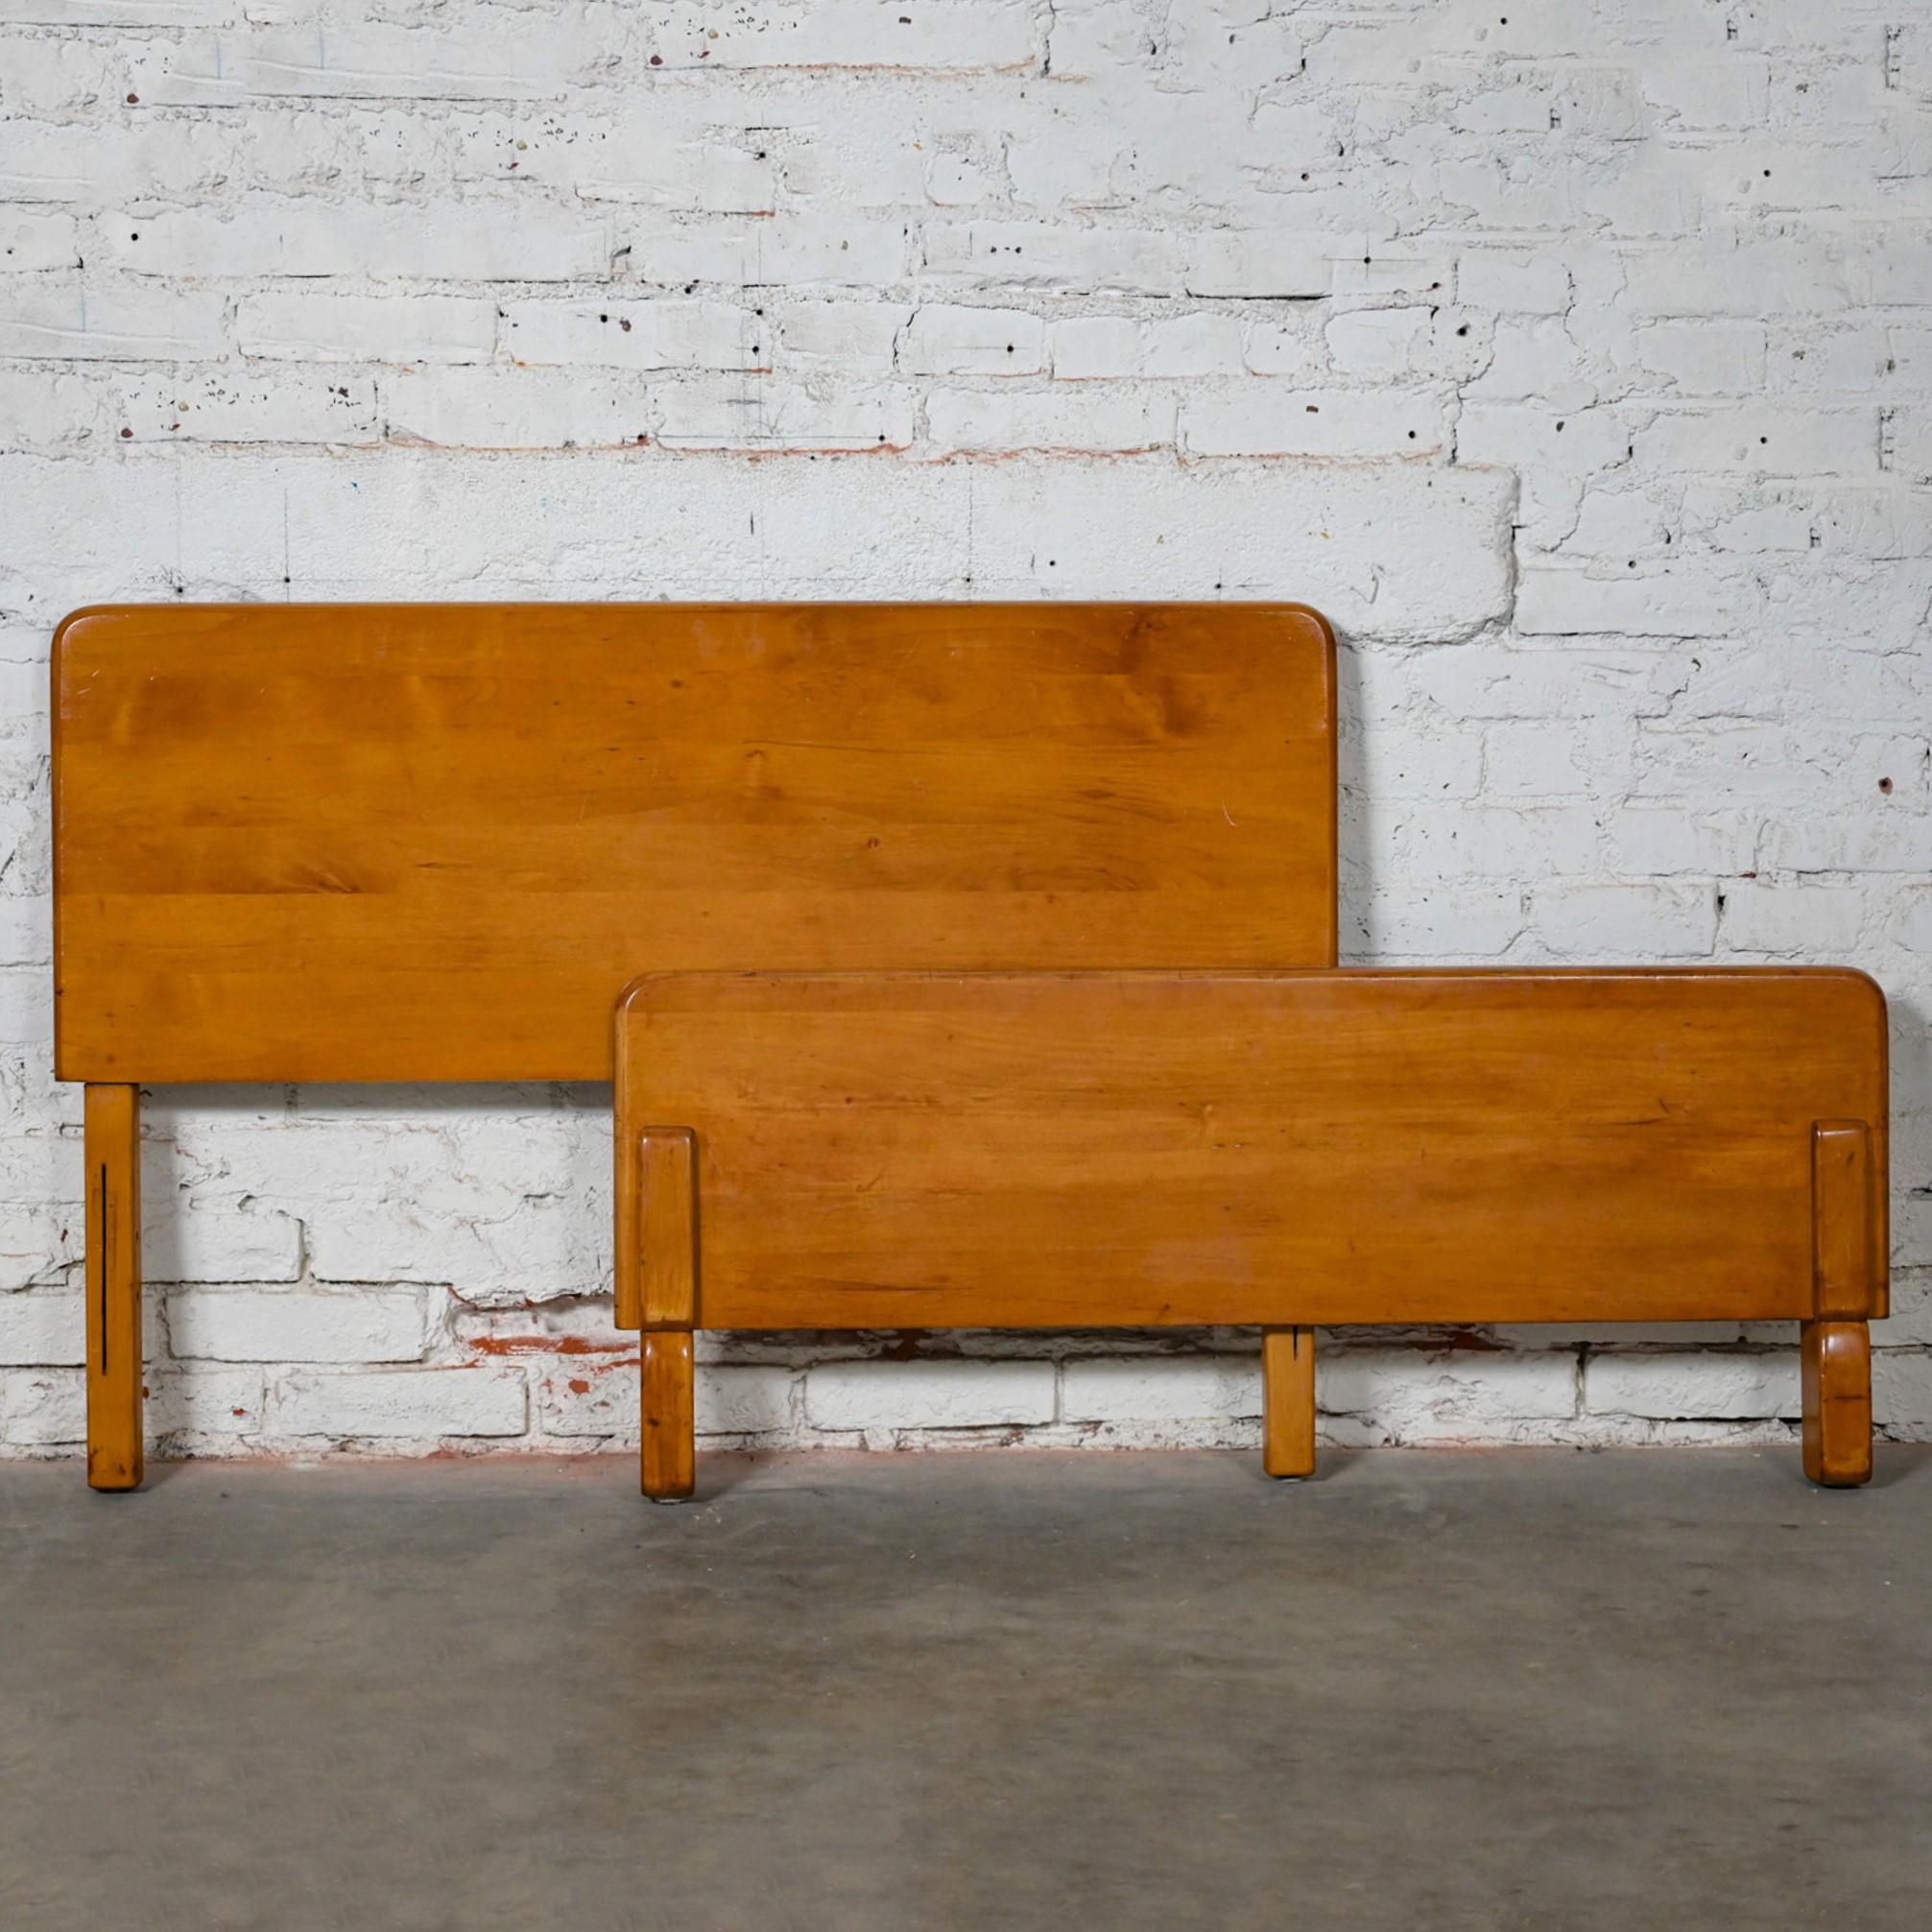 Early-Mid-20th Century Art Moderne Maple Twin Bed Headboard & Footboard  For Sale 8